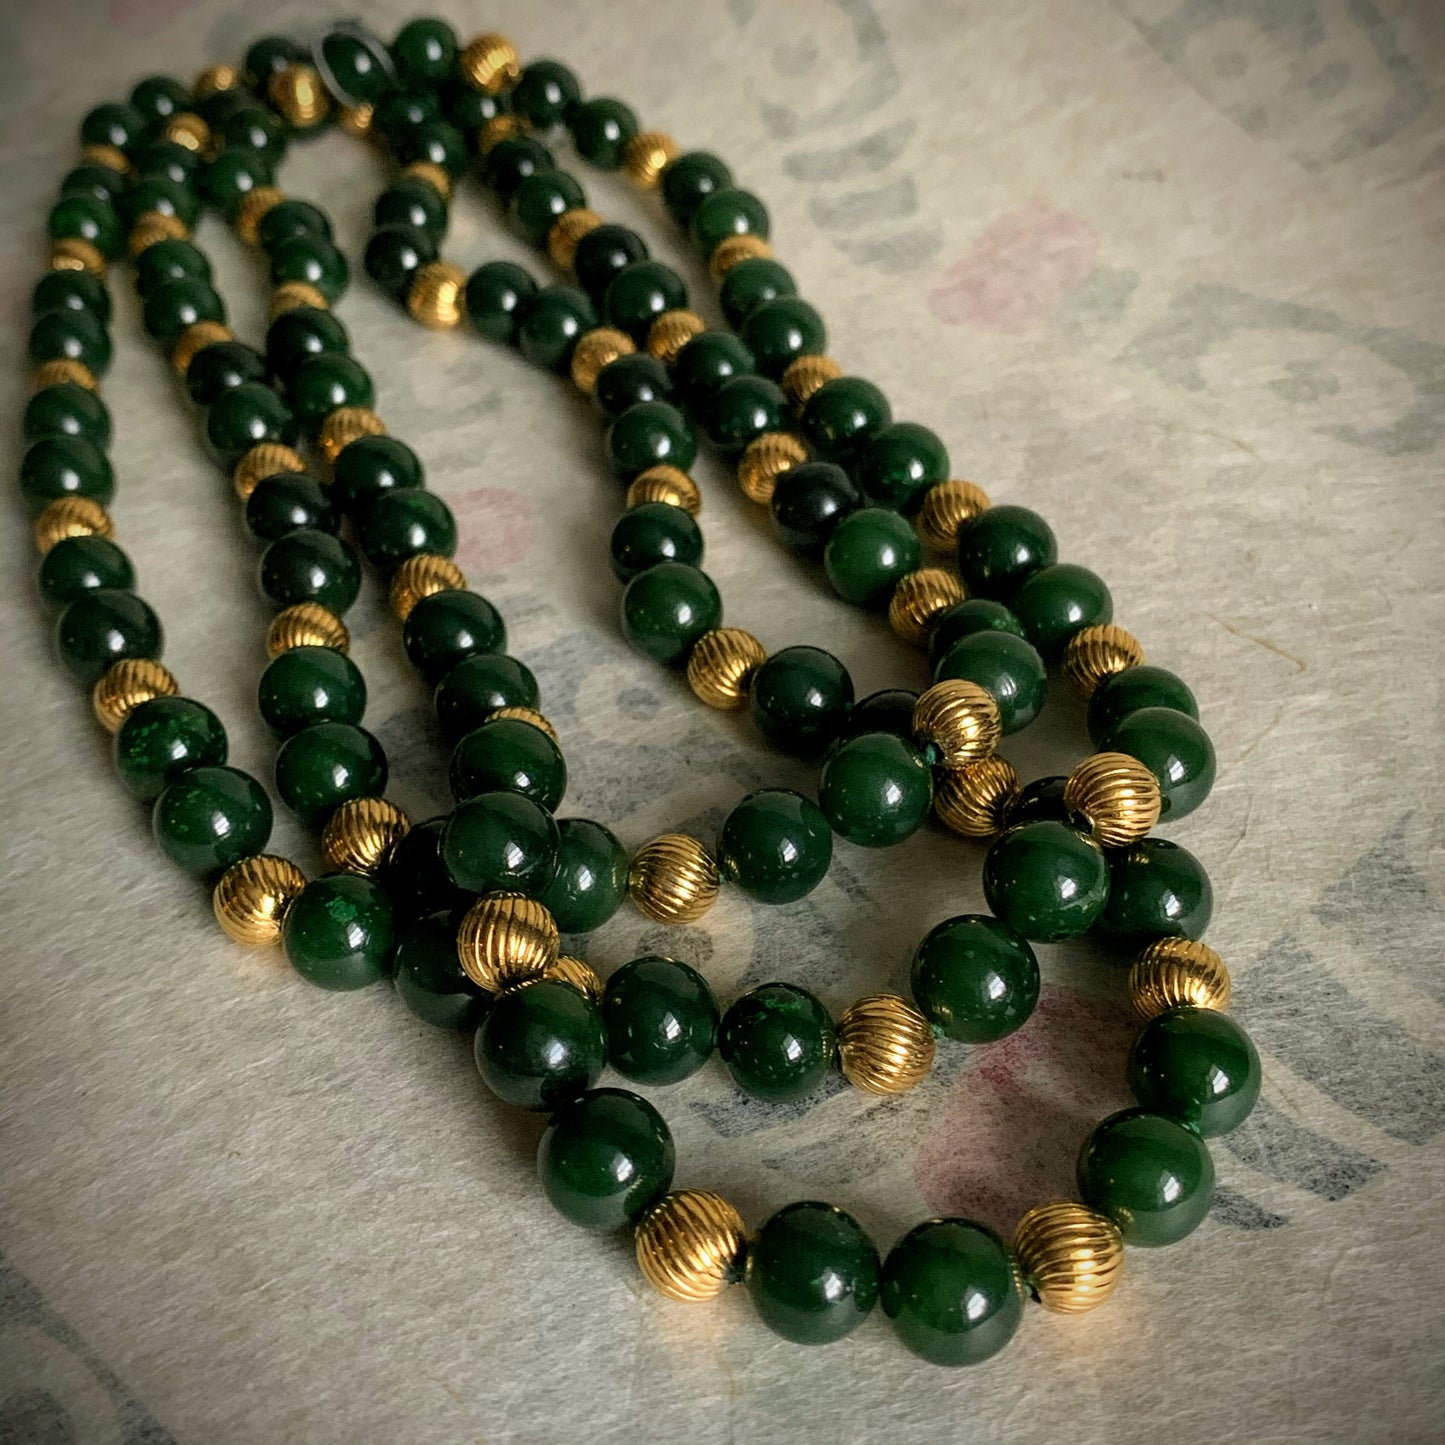 A nephrite jade and 14kt gold bead necklace